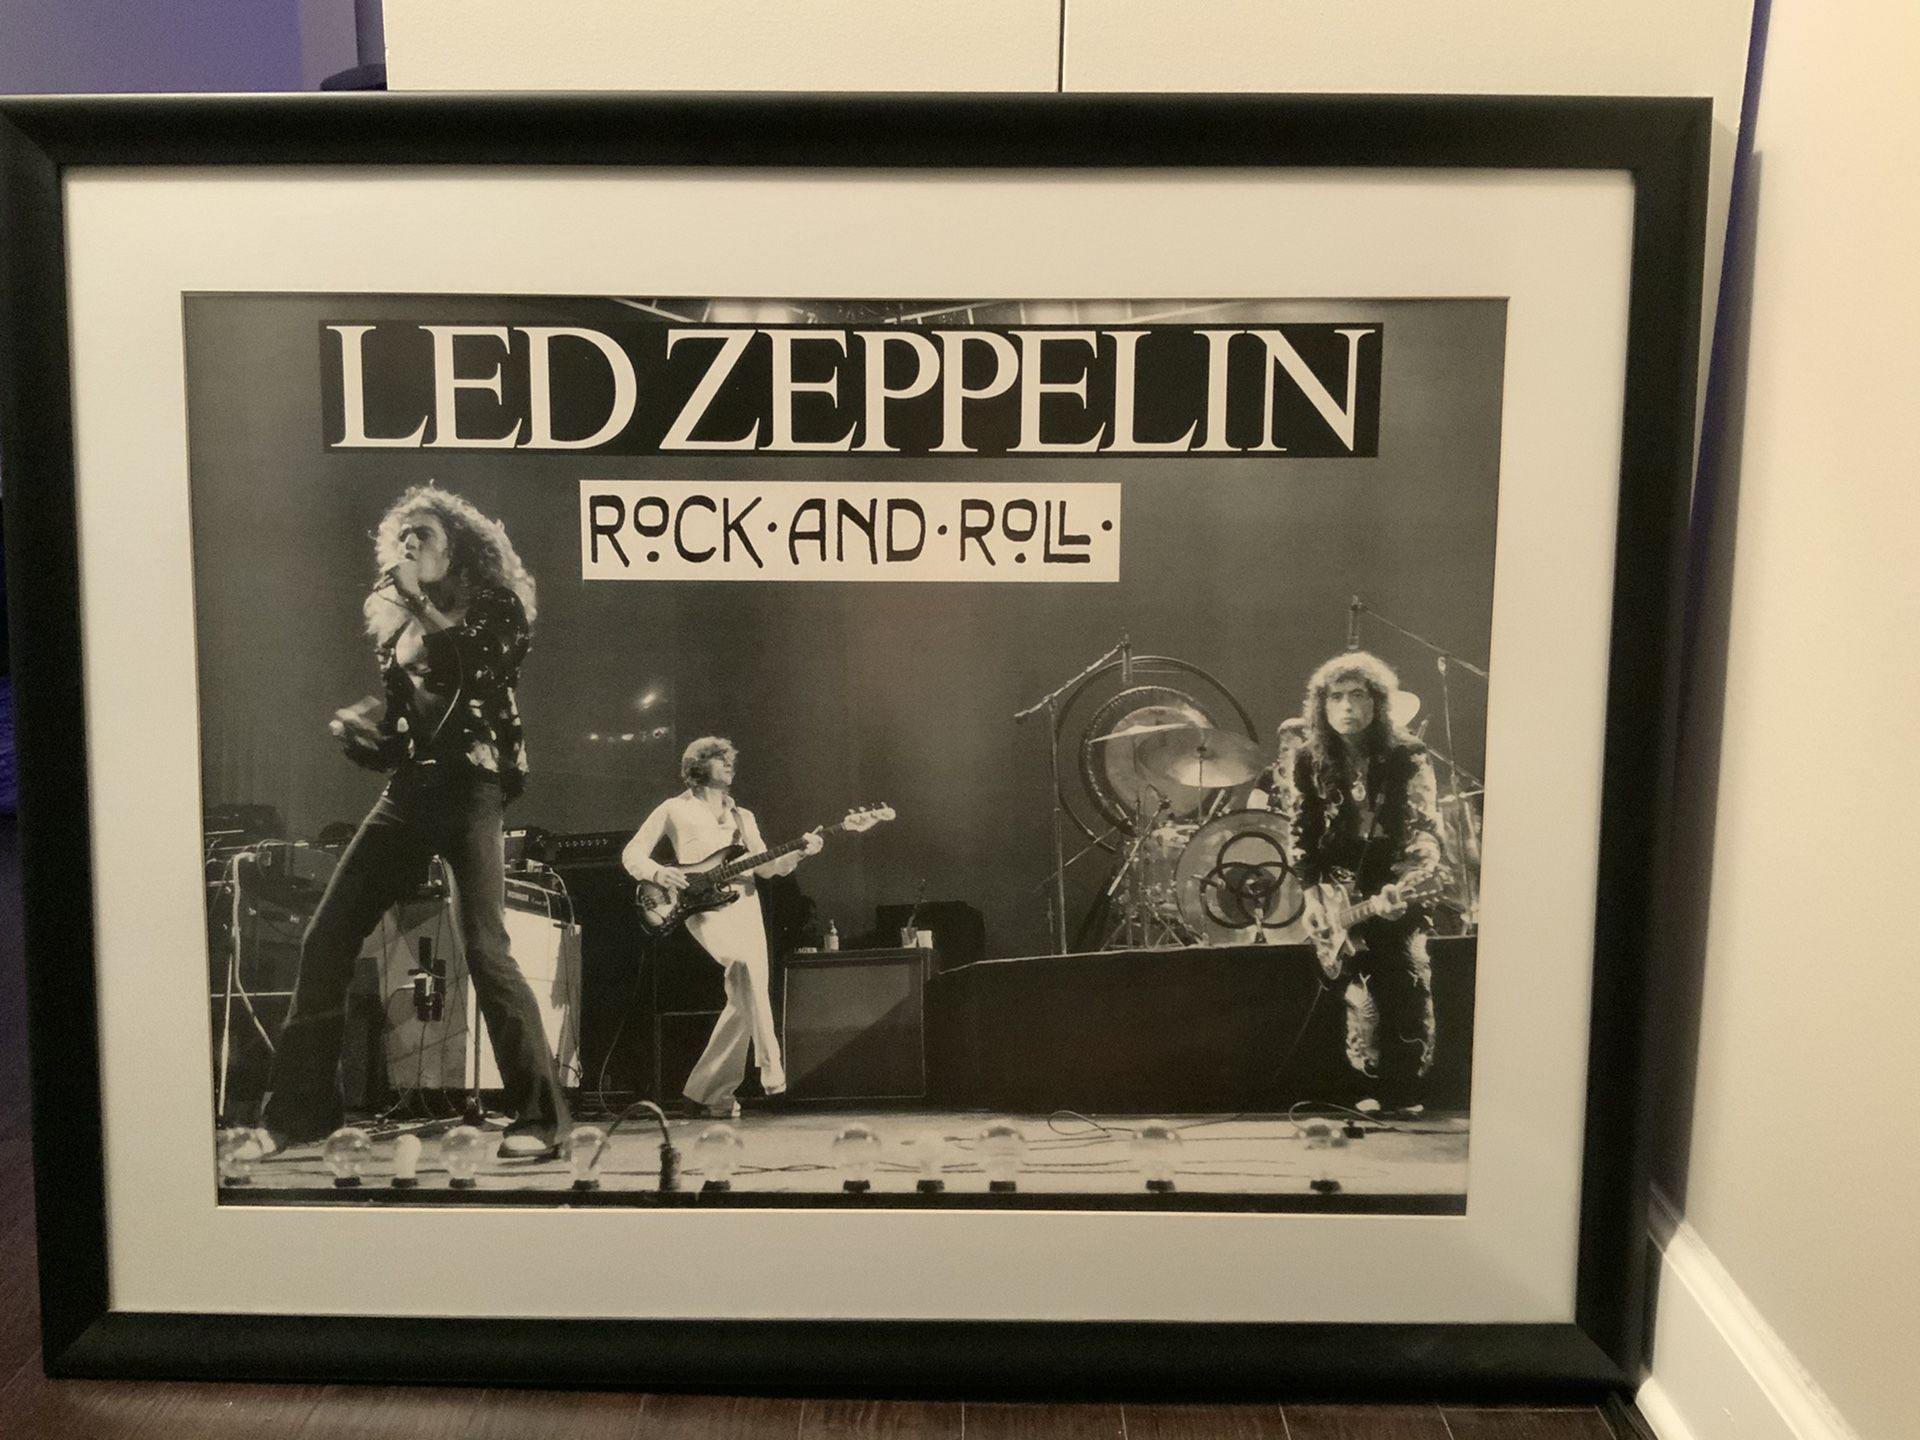 Led Zeppelin Professionally Framed Black and White Print ROCK AND ROLL